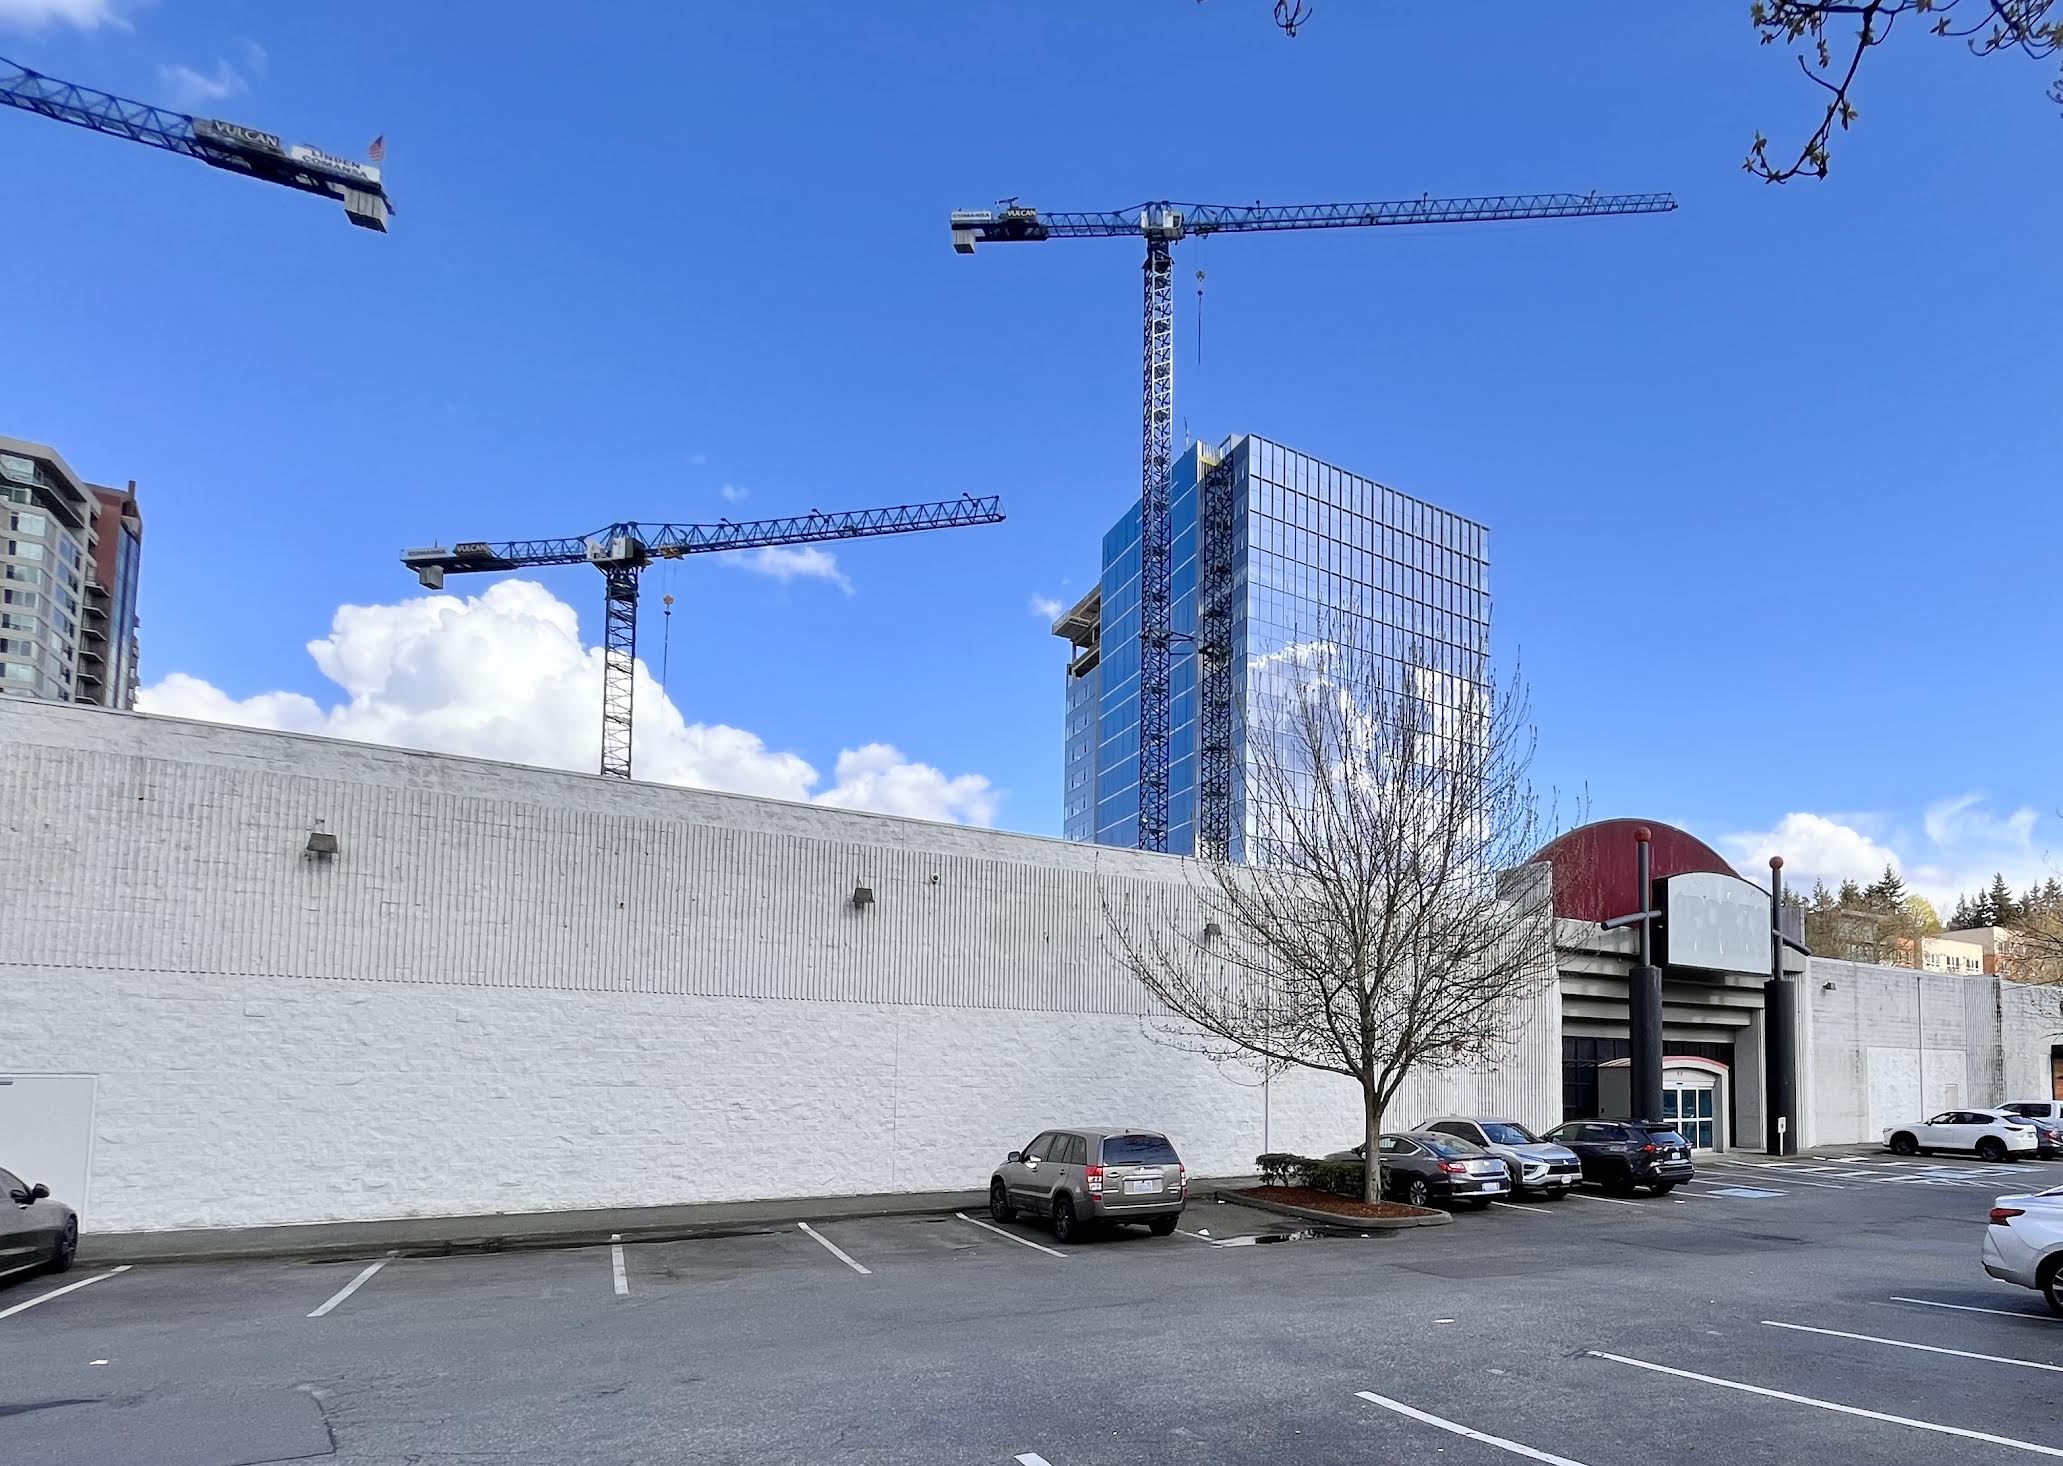 Interim Parking Garage Proposed at Old Sports Authority Location in Bellevue